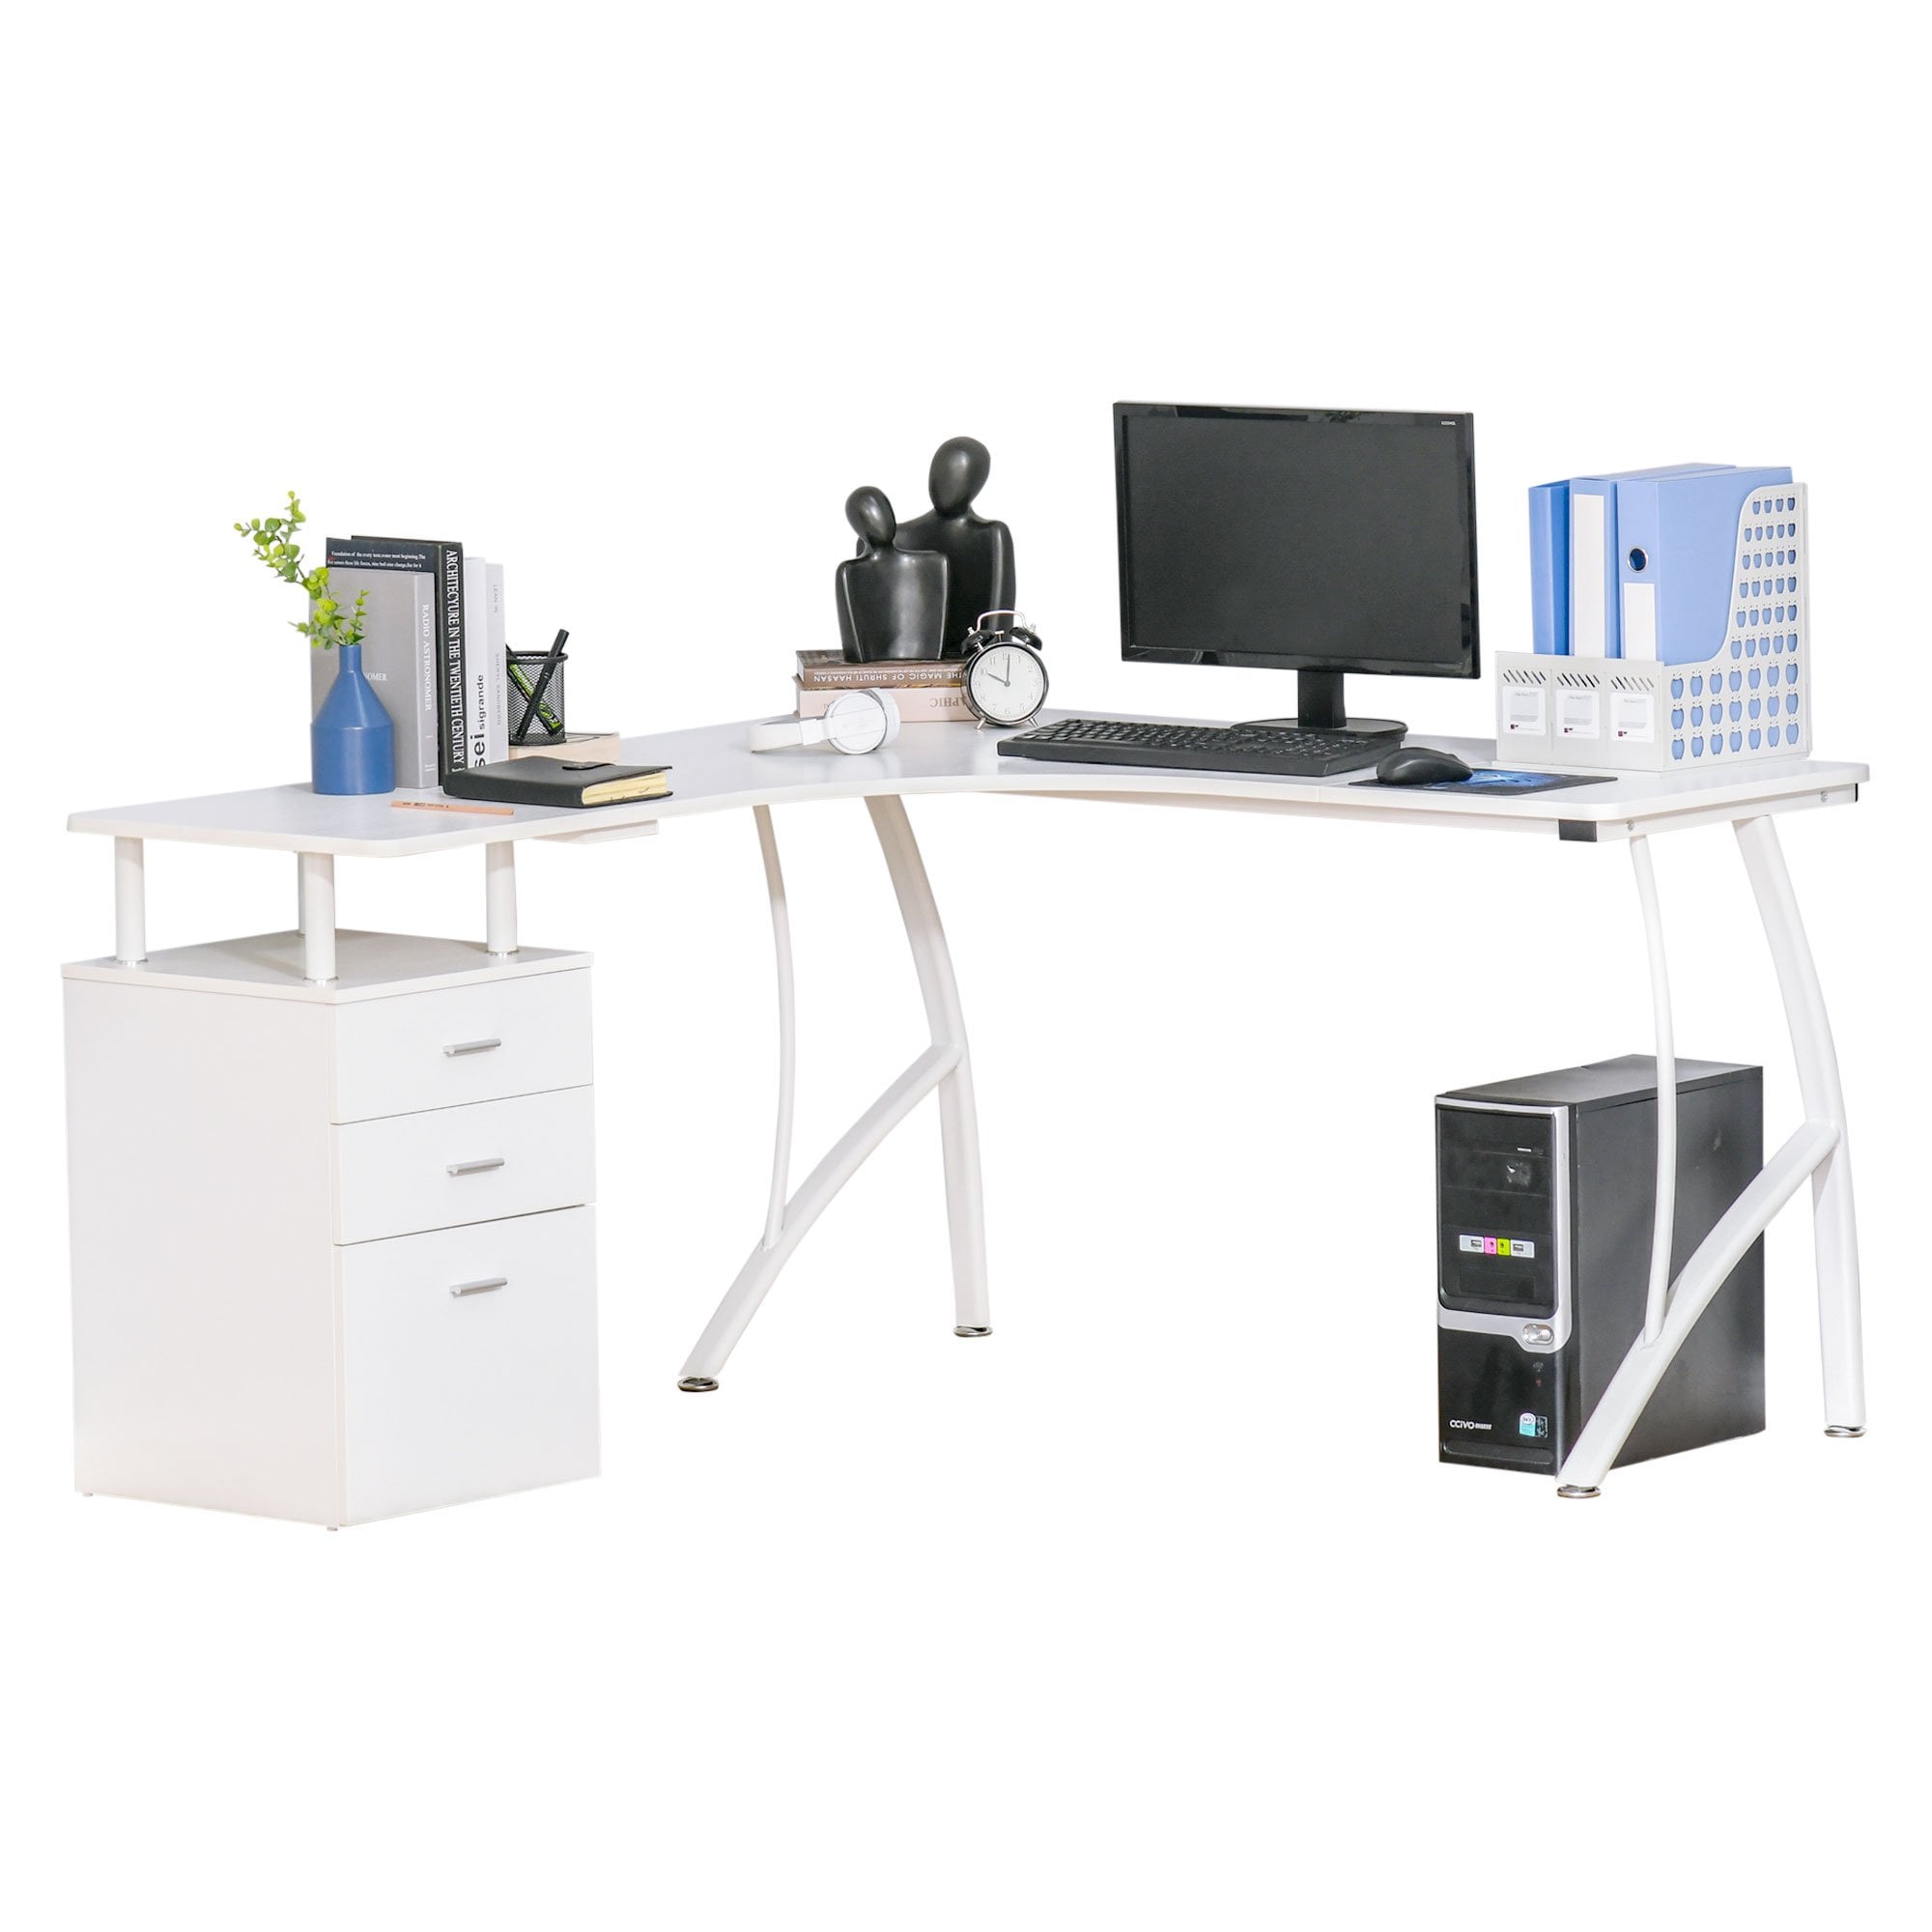 L-Shaped Computer Desk Table with Storage Drawer Home Office Corner Industrial Style Workstation - White PC - CARTER  | TJ Hughes